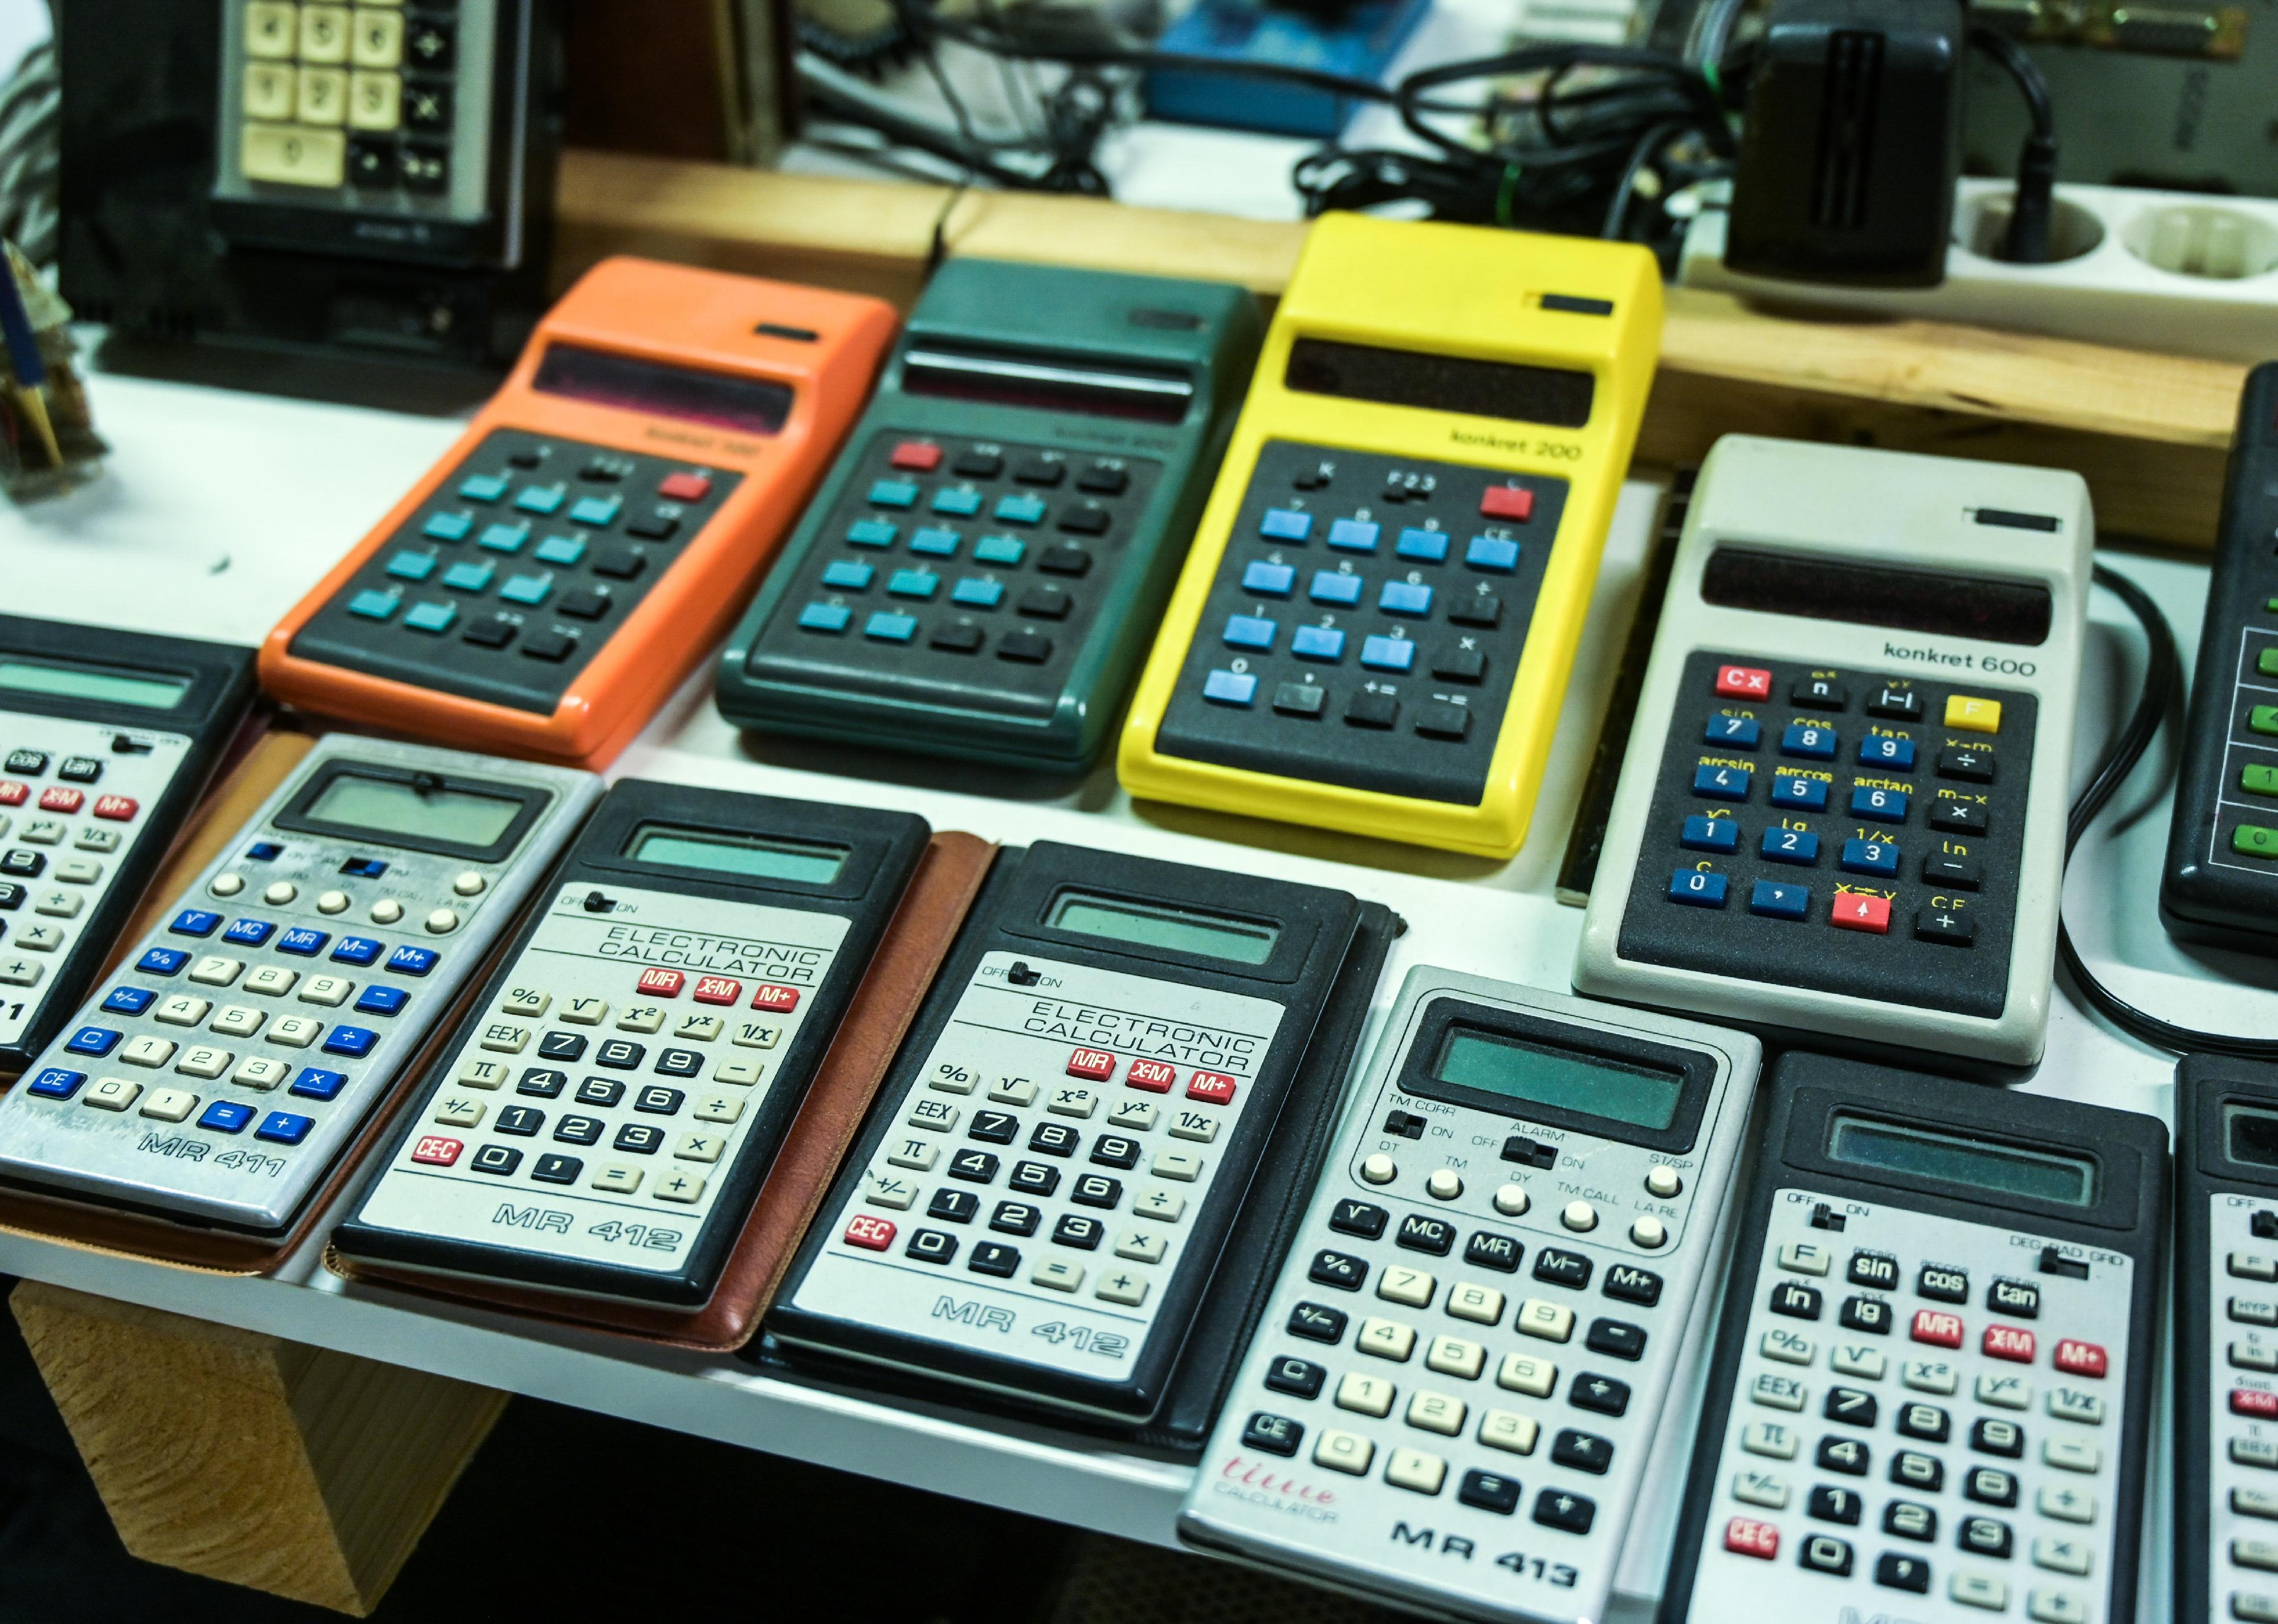 A collection of vintage pocket calculators from different generations.